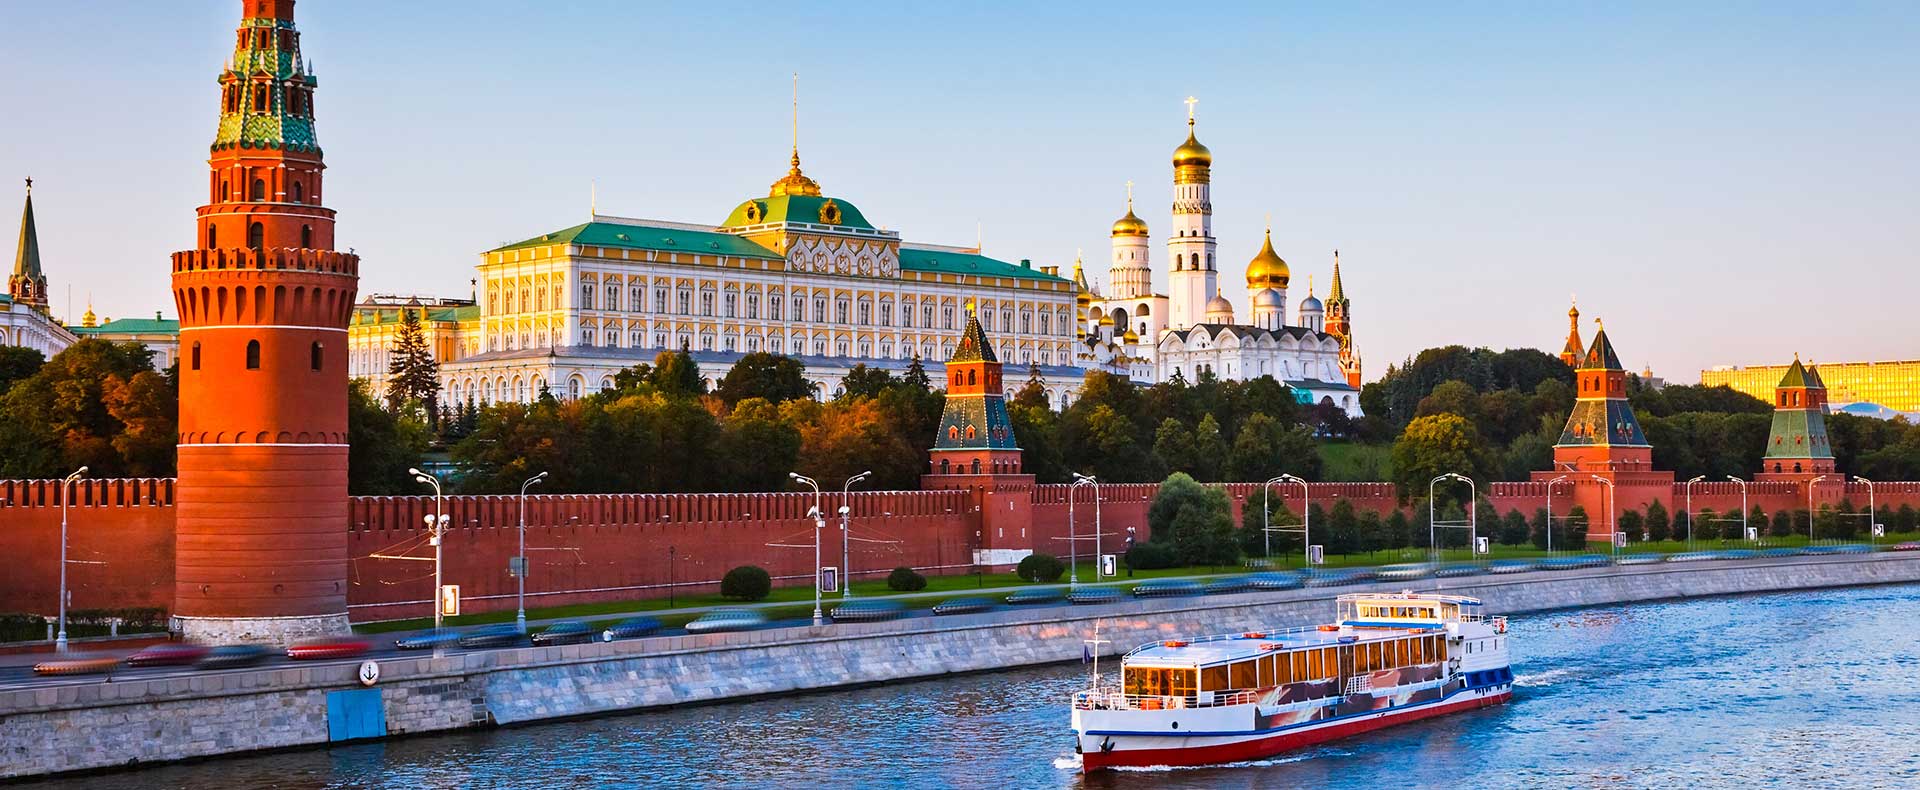 Travel in Russia: Visit Moscow and St-Petersburg | Tsar Voyages